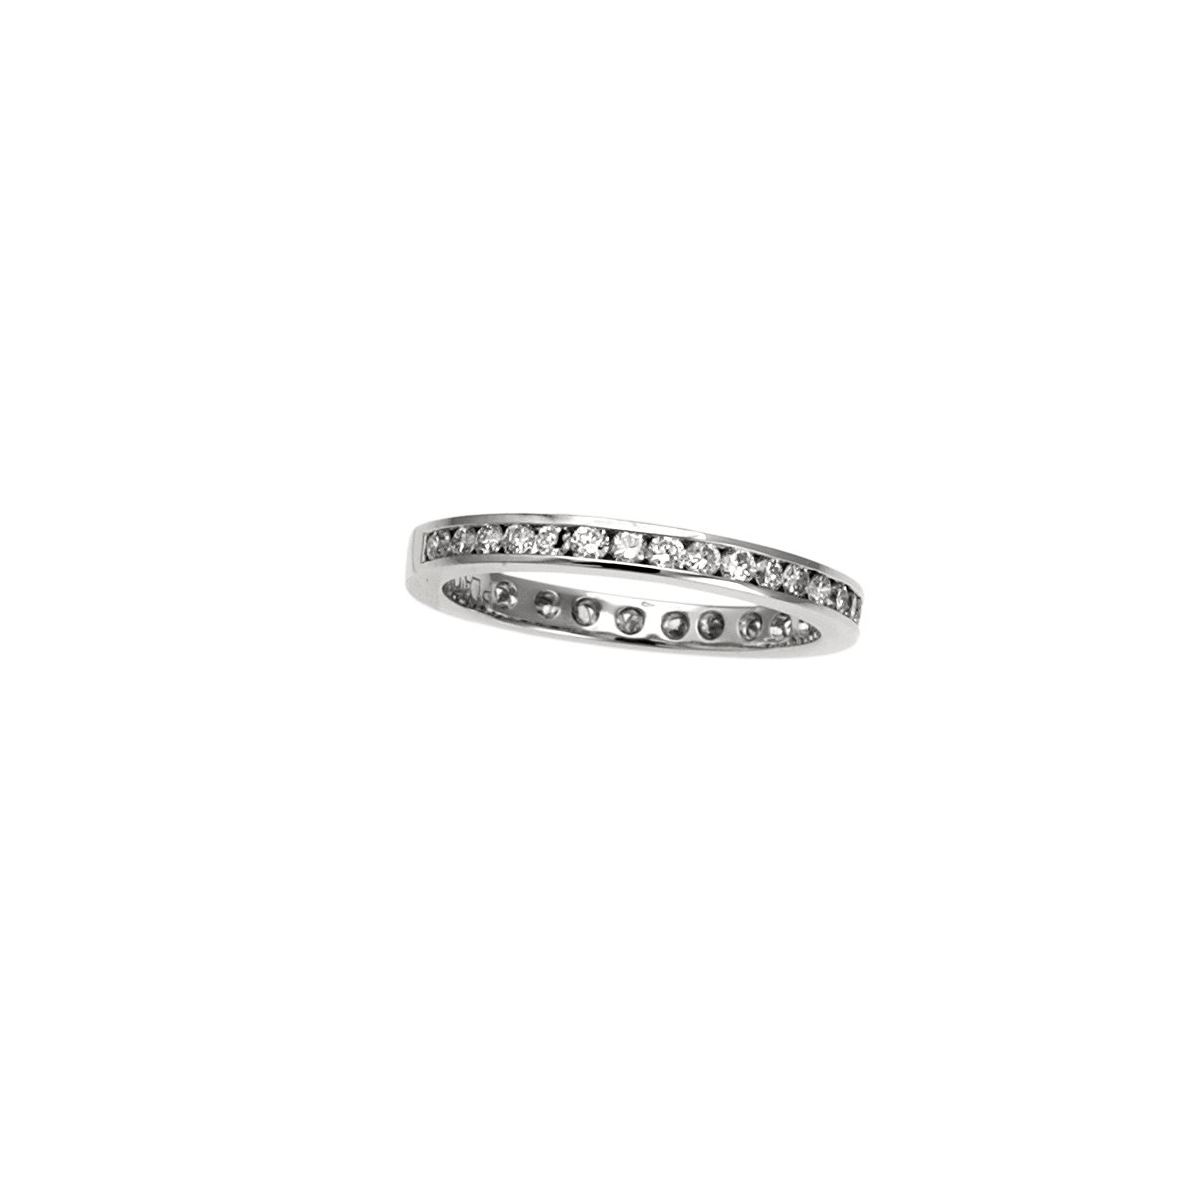 ETERNITY WEDDING BAND - Chris Aire Fine Jewelry & Timepieces